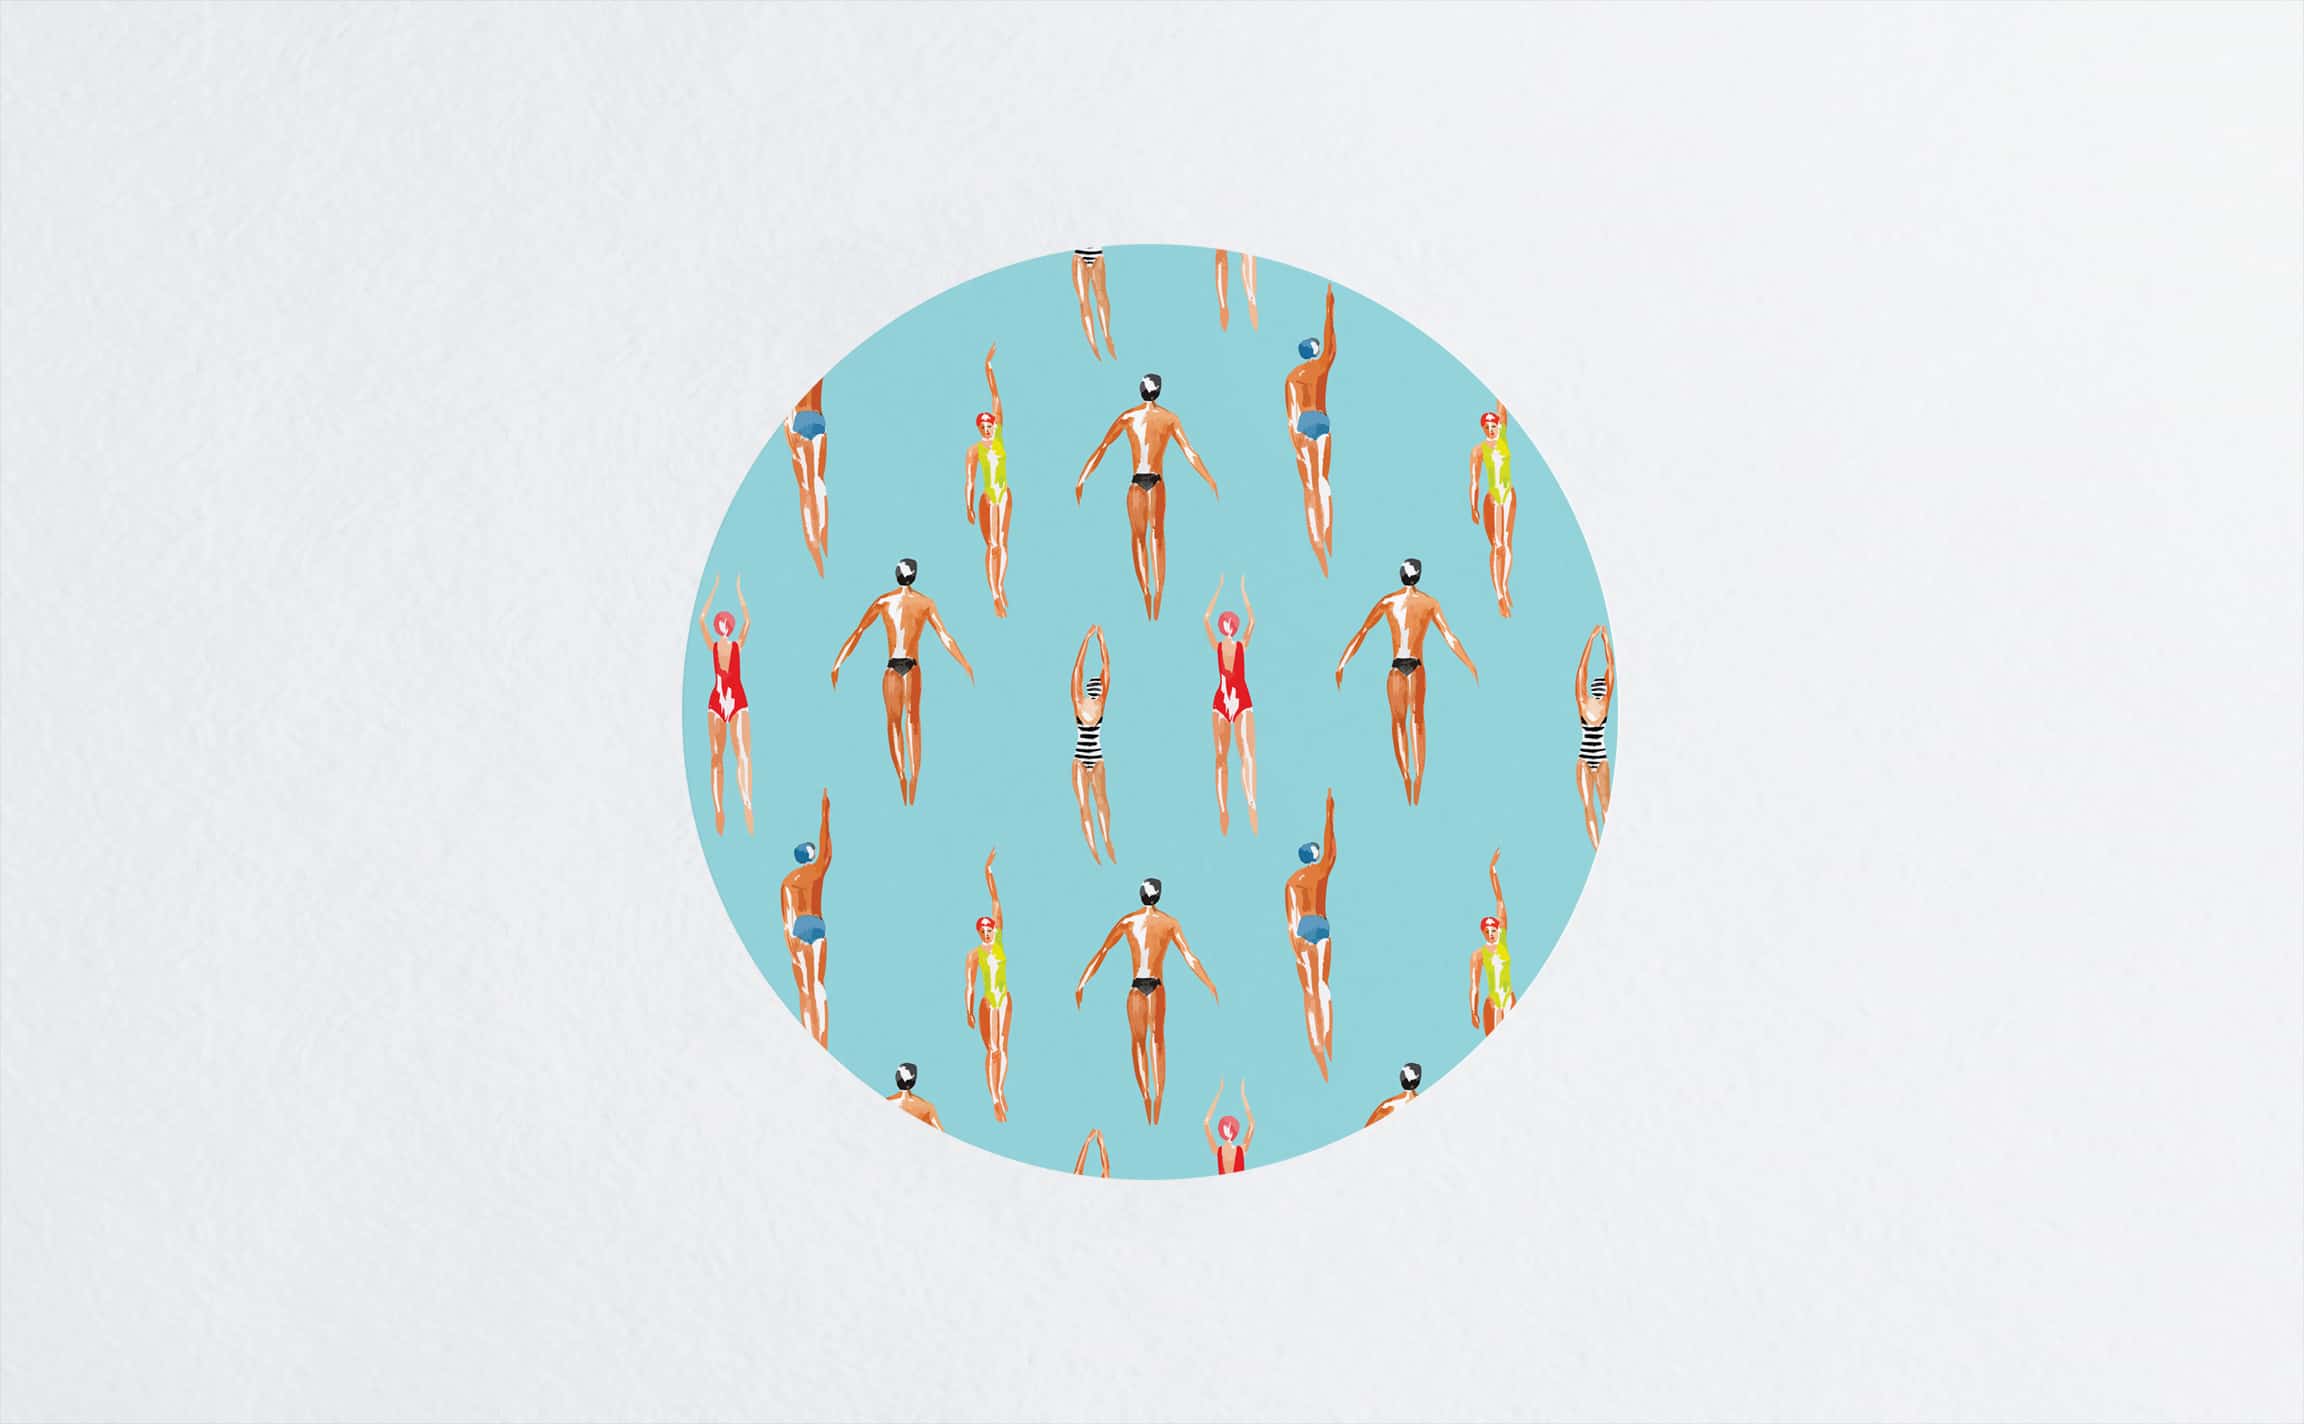 Swimmers Circle Wall Decal by Walls Need LoveΓö¼┬½